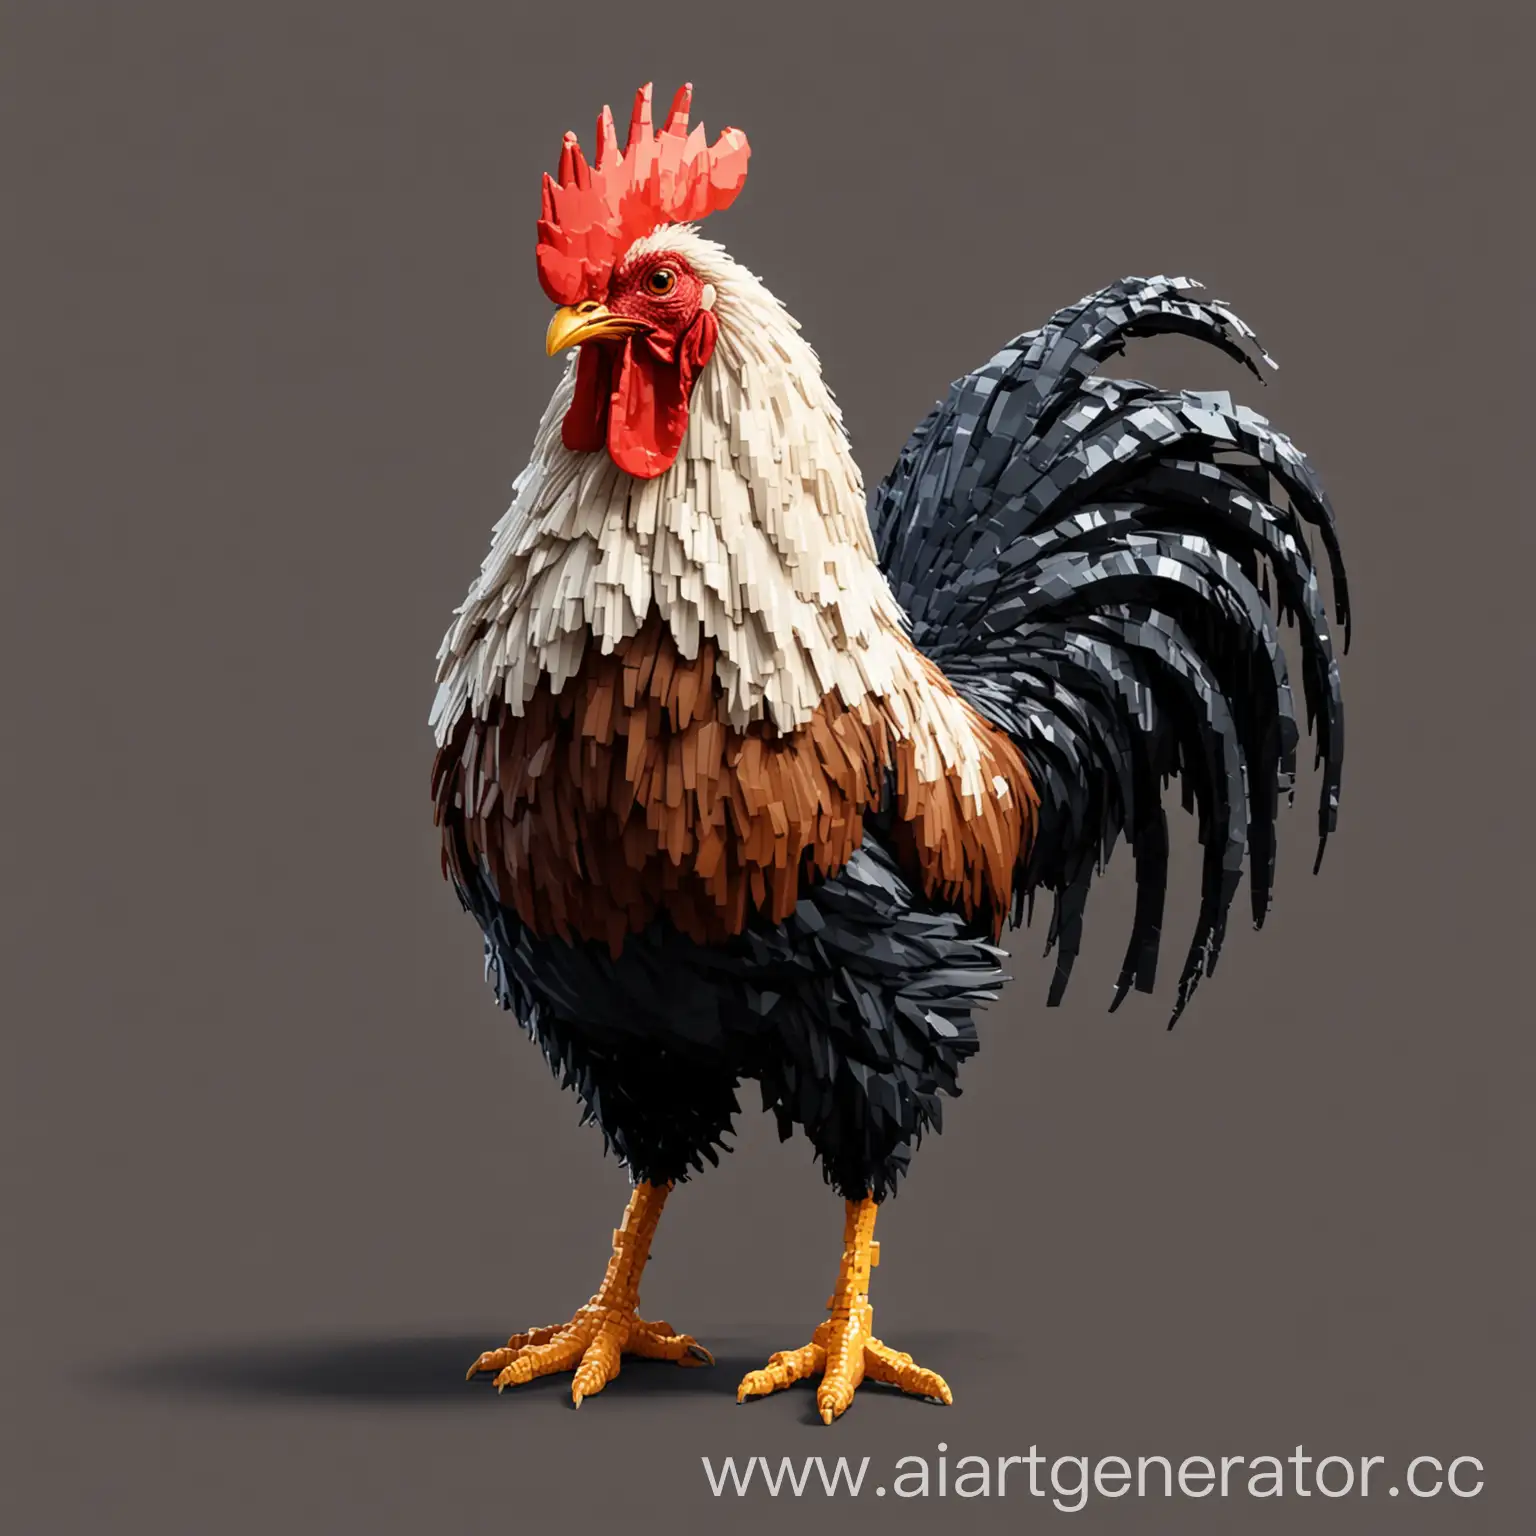 Colorful-Pixel-NFT-Art-Featuring-a-Majestic-Rooster